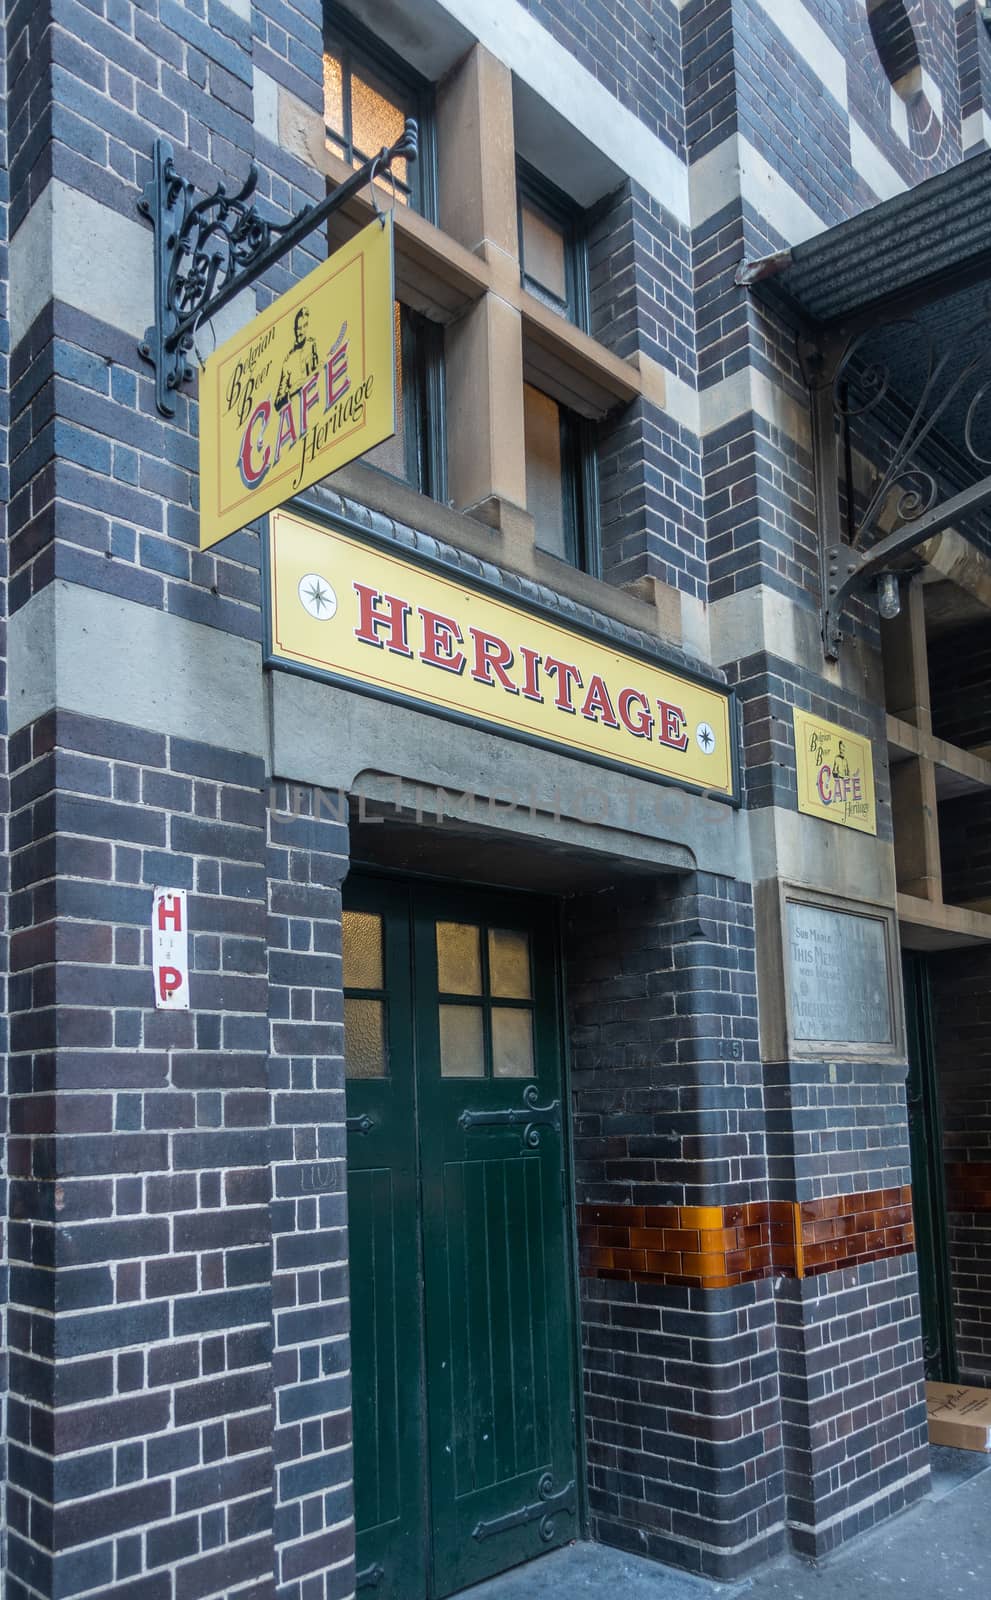 Sydney, Australia - February 12, 2019: Entance and facade to Belgian Beer Cafe Heritage in Harrington Street. Red on Yellow advertisements.